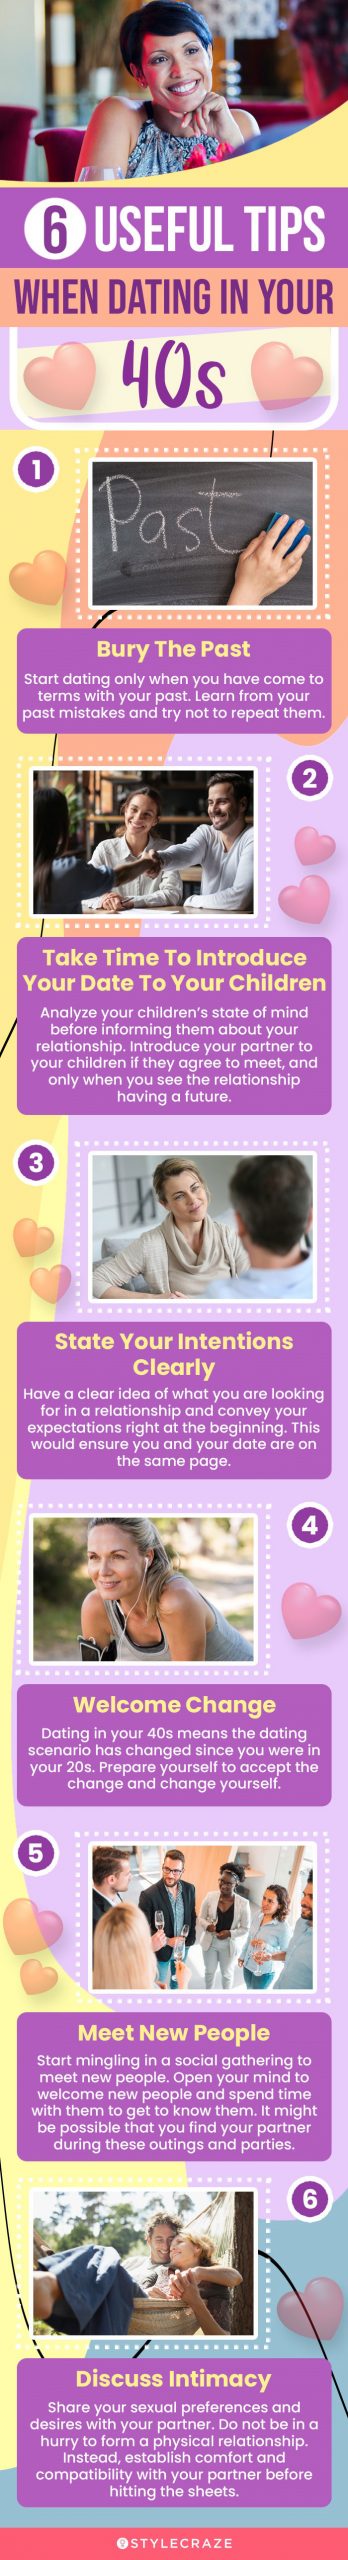 6 useful tips when dating in your 40s (infographic)